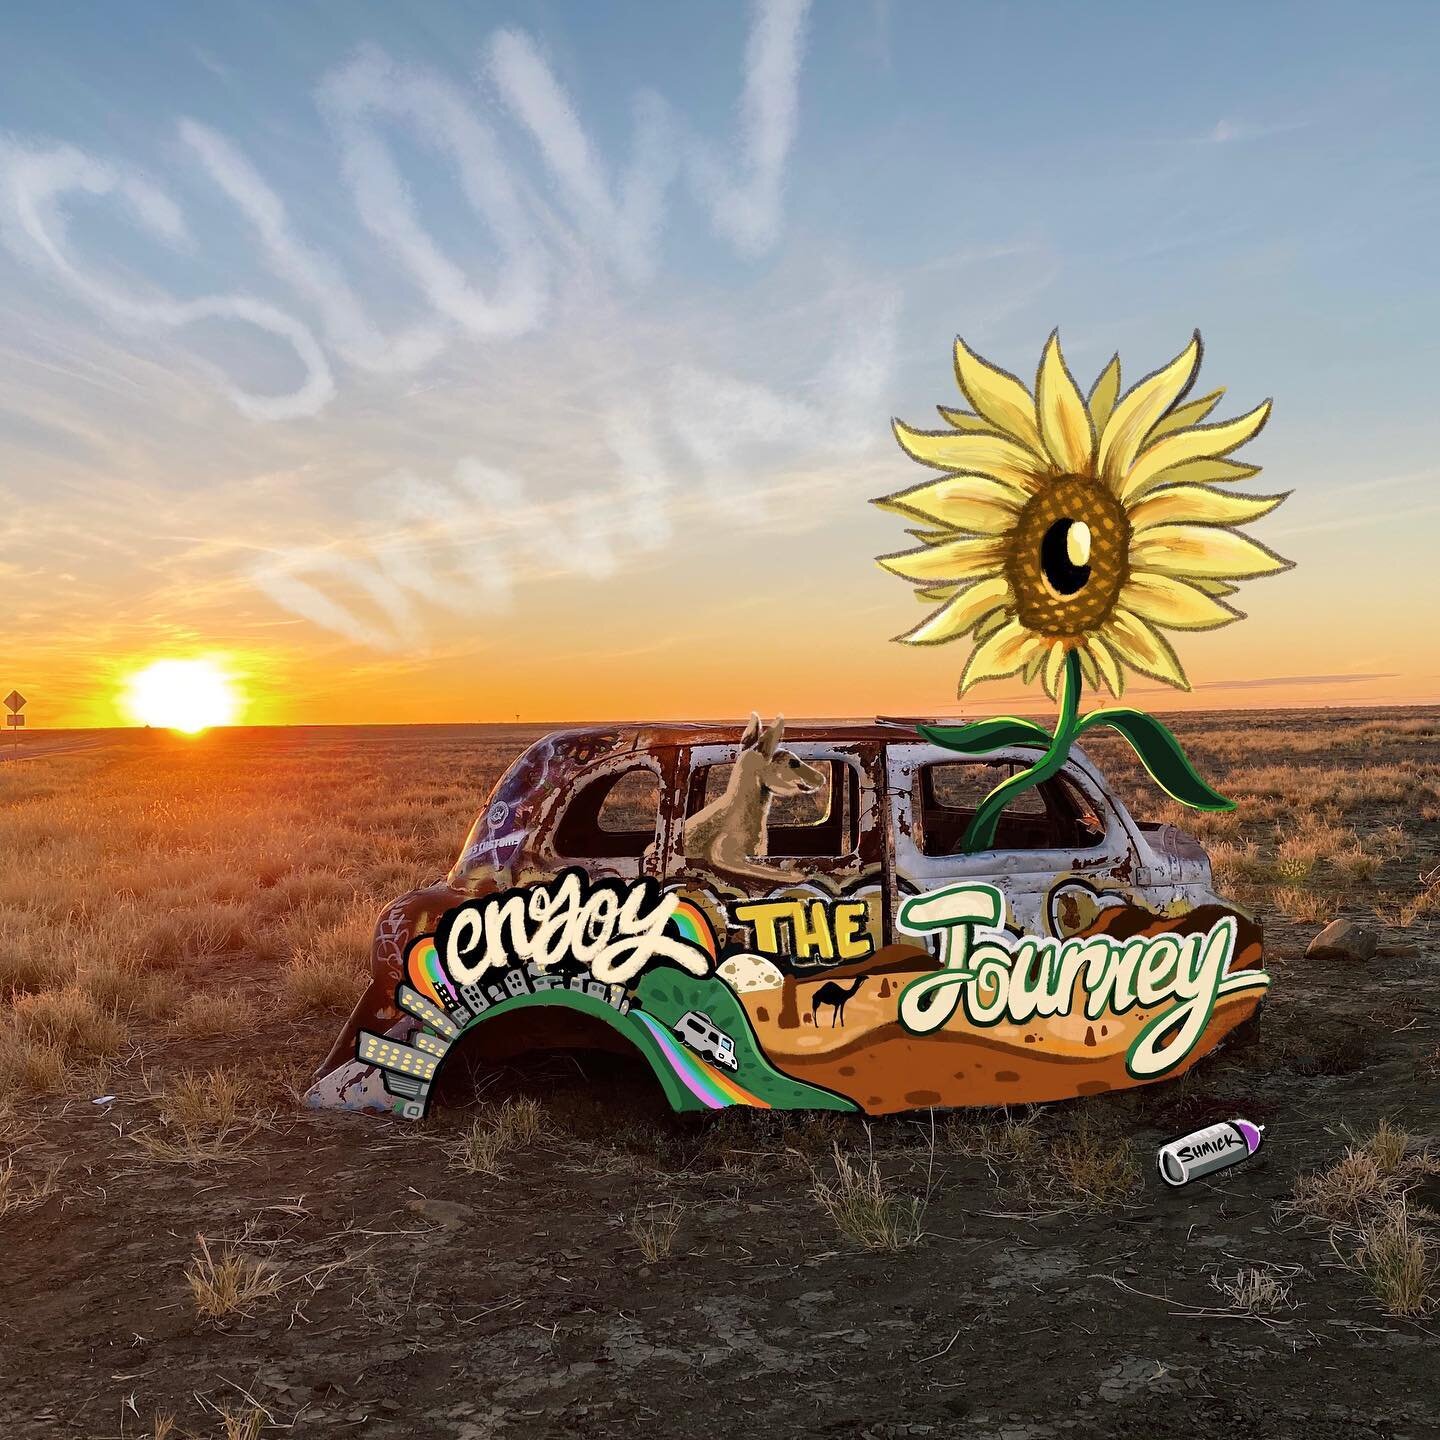 Drawing over a photo I took in the outback 🌞

I was on a mission &amp; wasn&rsquo;t going to stop, but I love old rusty cars 😄

Sometimes we&rsquo;re in such a rush to get to a destination we forget to slow down and enjoy the ride ✨ Have a beautifu